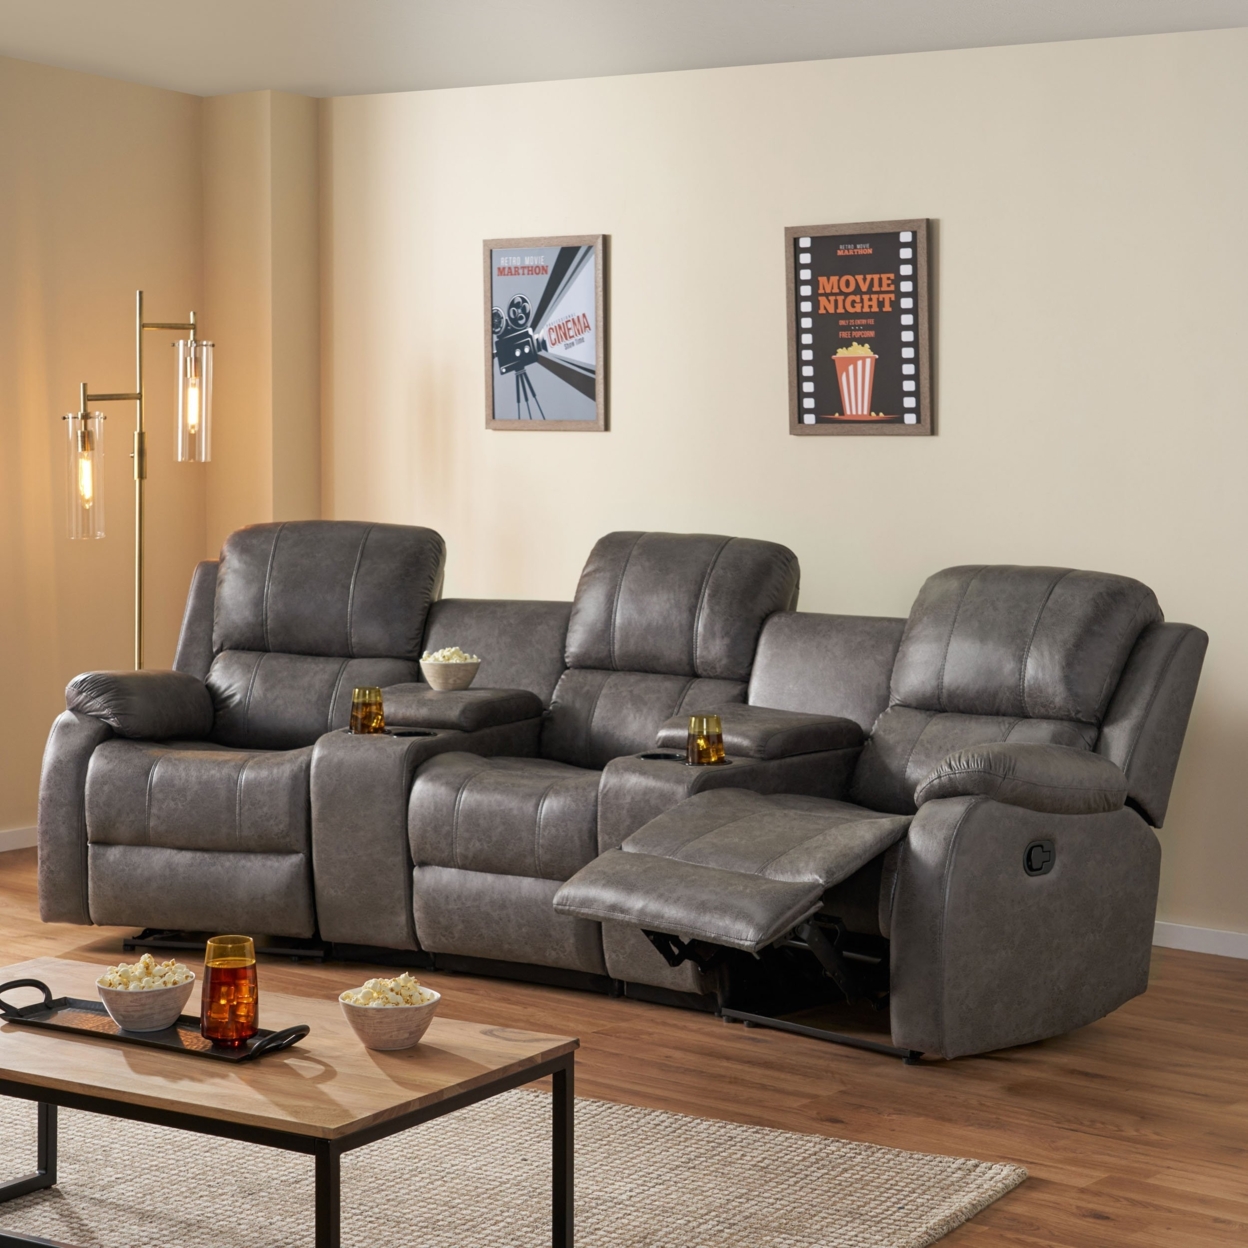 Lunsford Contemporary Upholstered Theater Seating Reclining Sofa - Black/grey/gray